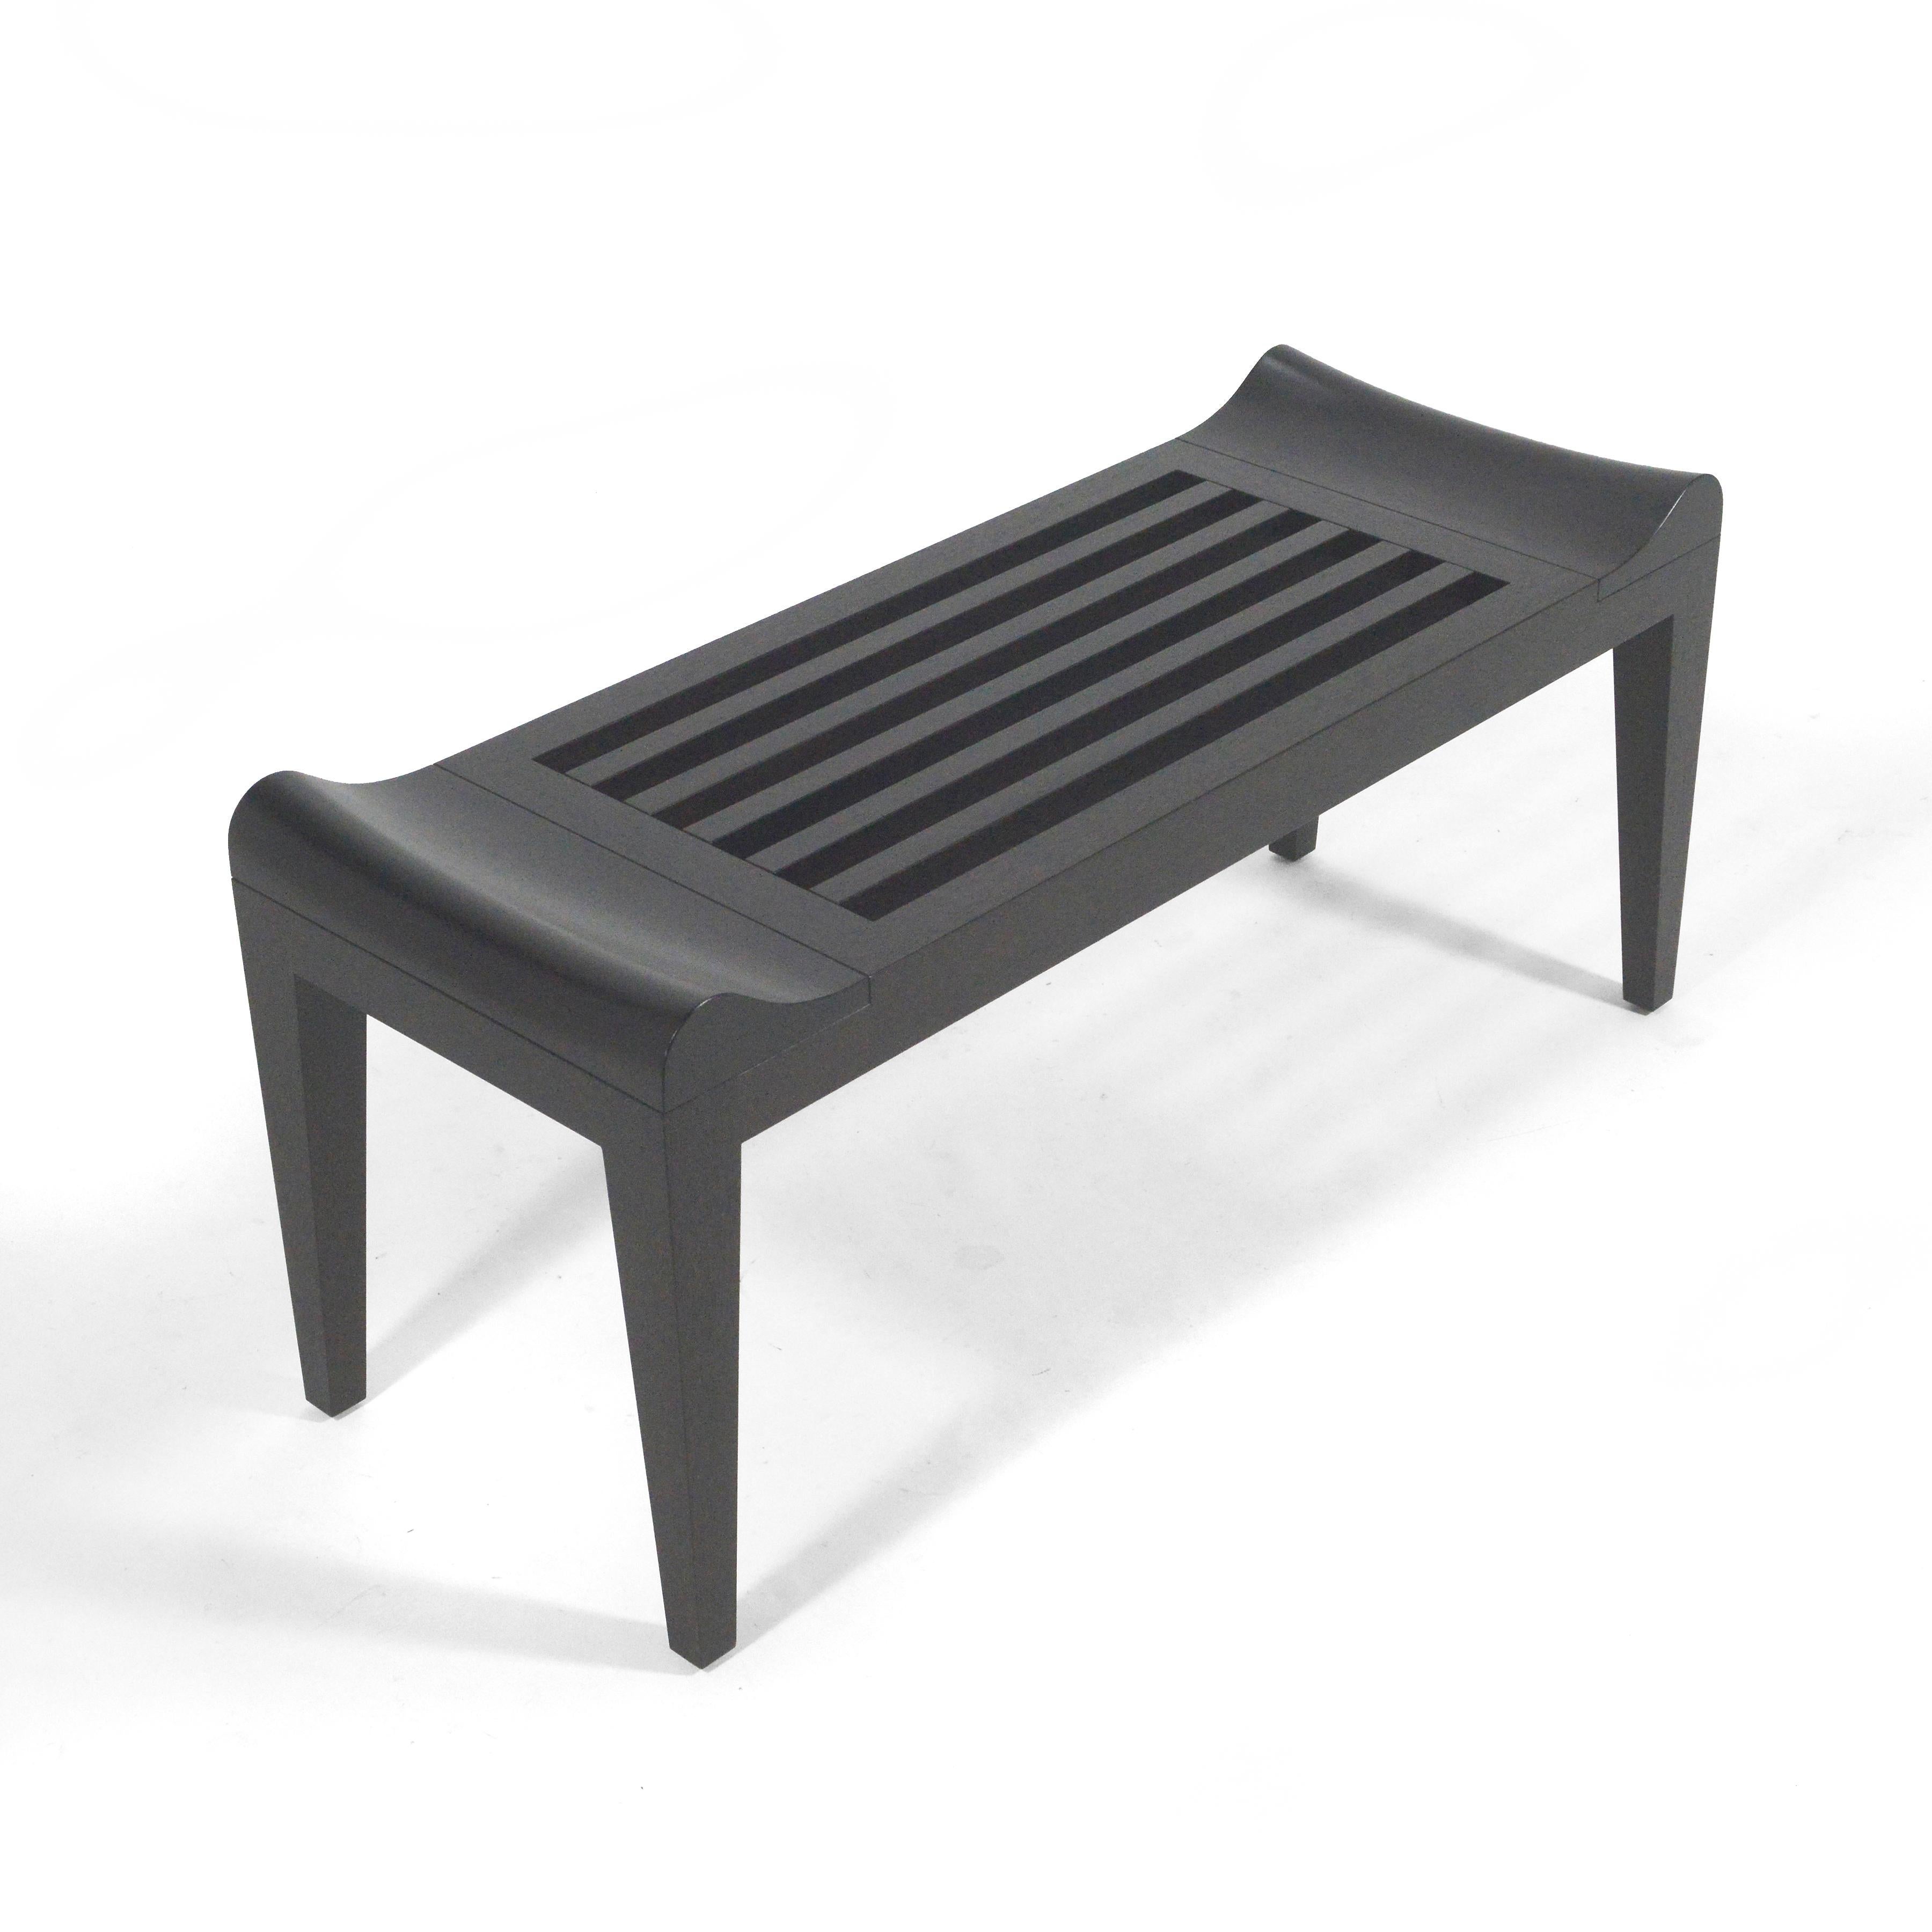 This beautiful slat bench by Christian Liaigre for Holly Hunt is crafted of African rosewood and is perfectly scaled to be used in an entryway, at the foot of the bed, or anywhere an elegant, undestated bench would be appropriate.


Measures: 20